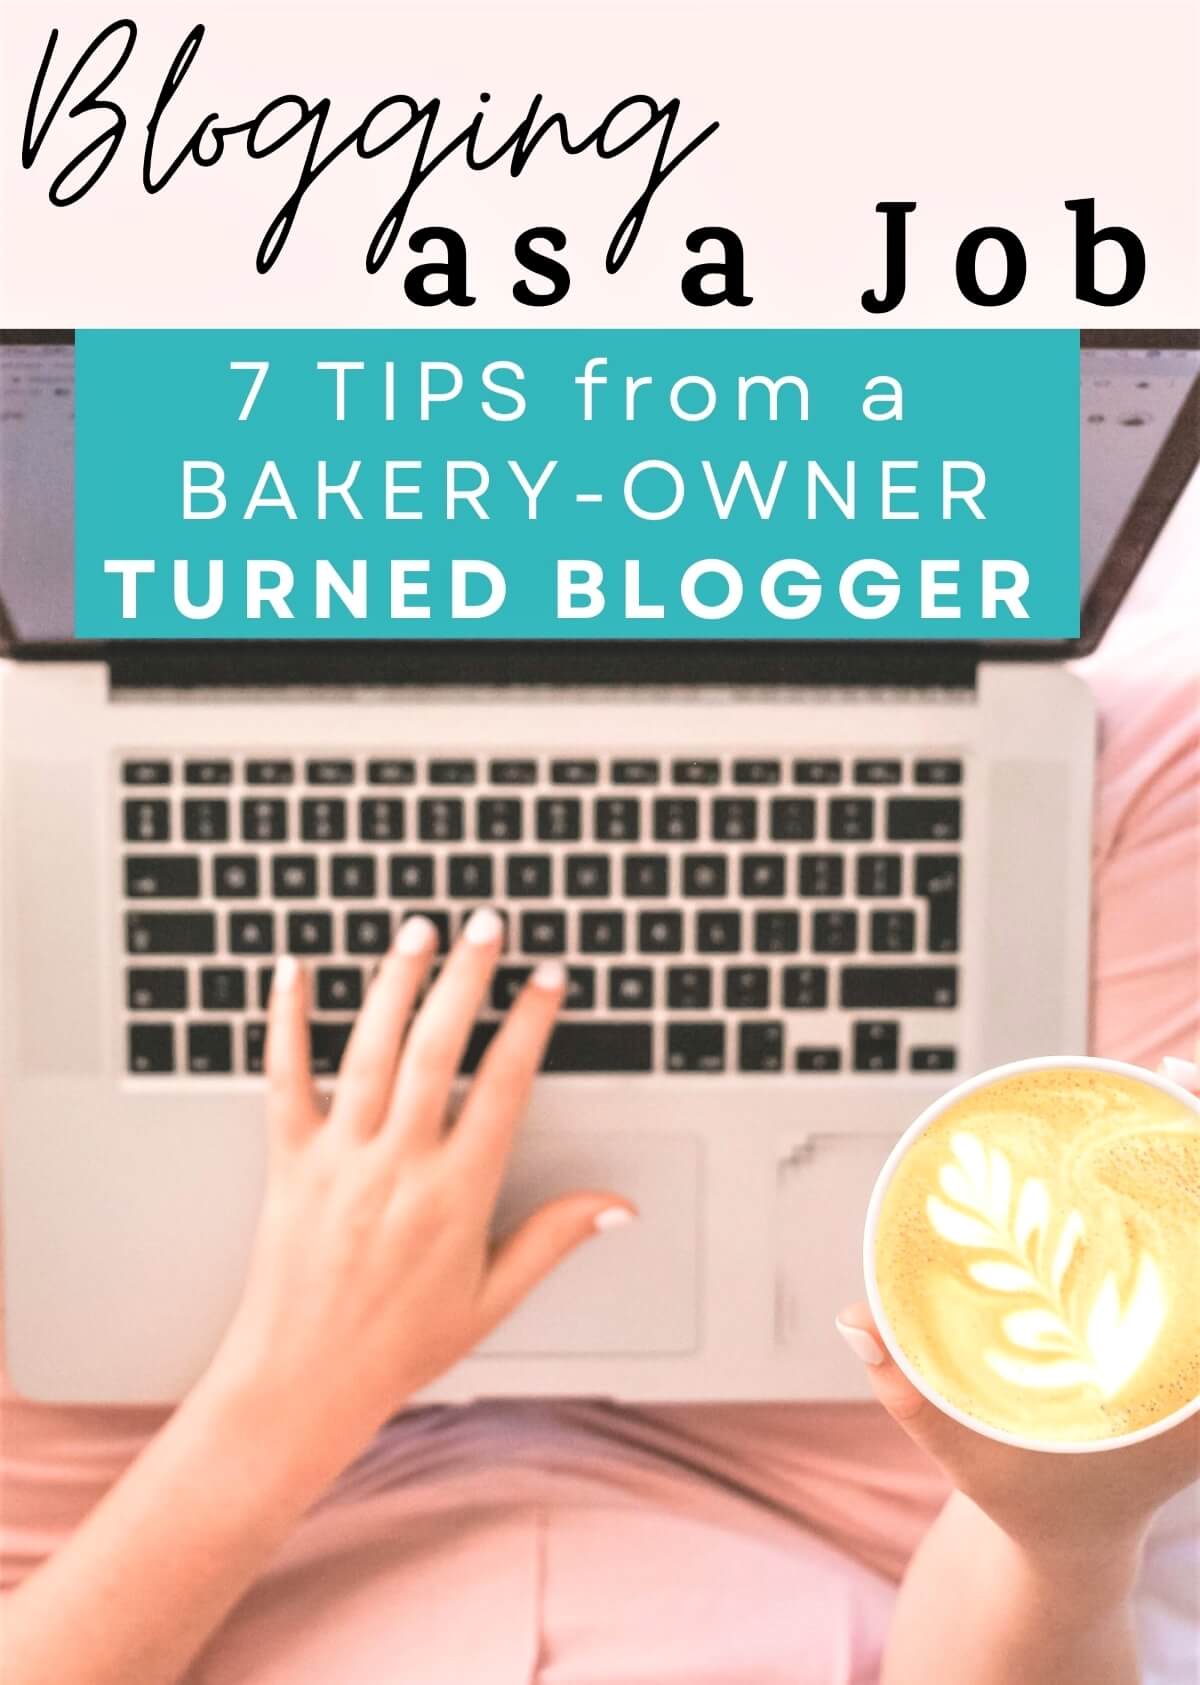 A woman's hands working on a laptop with the text "blogging as a job-7 tips from a bakery owner turned blogger."